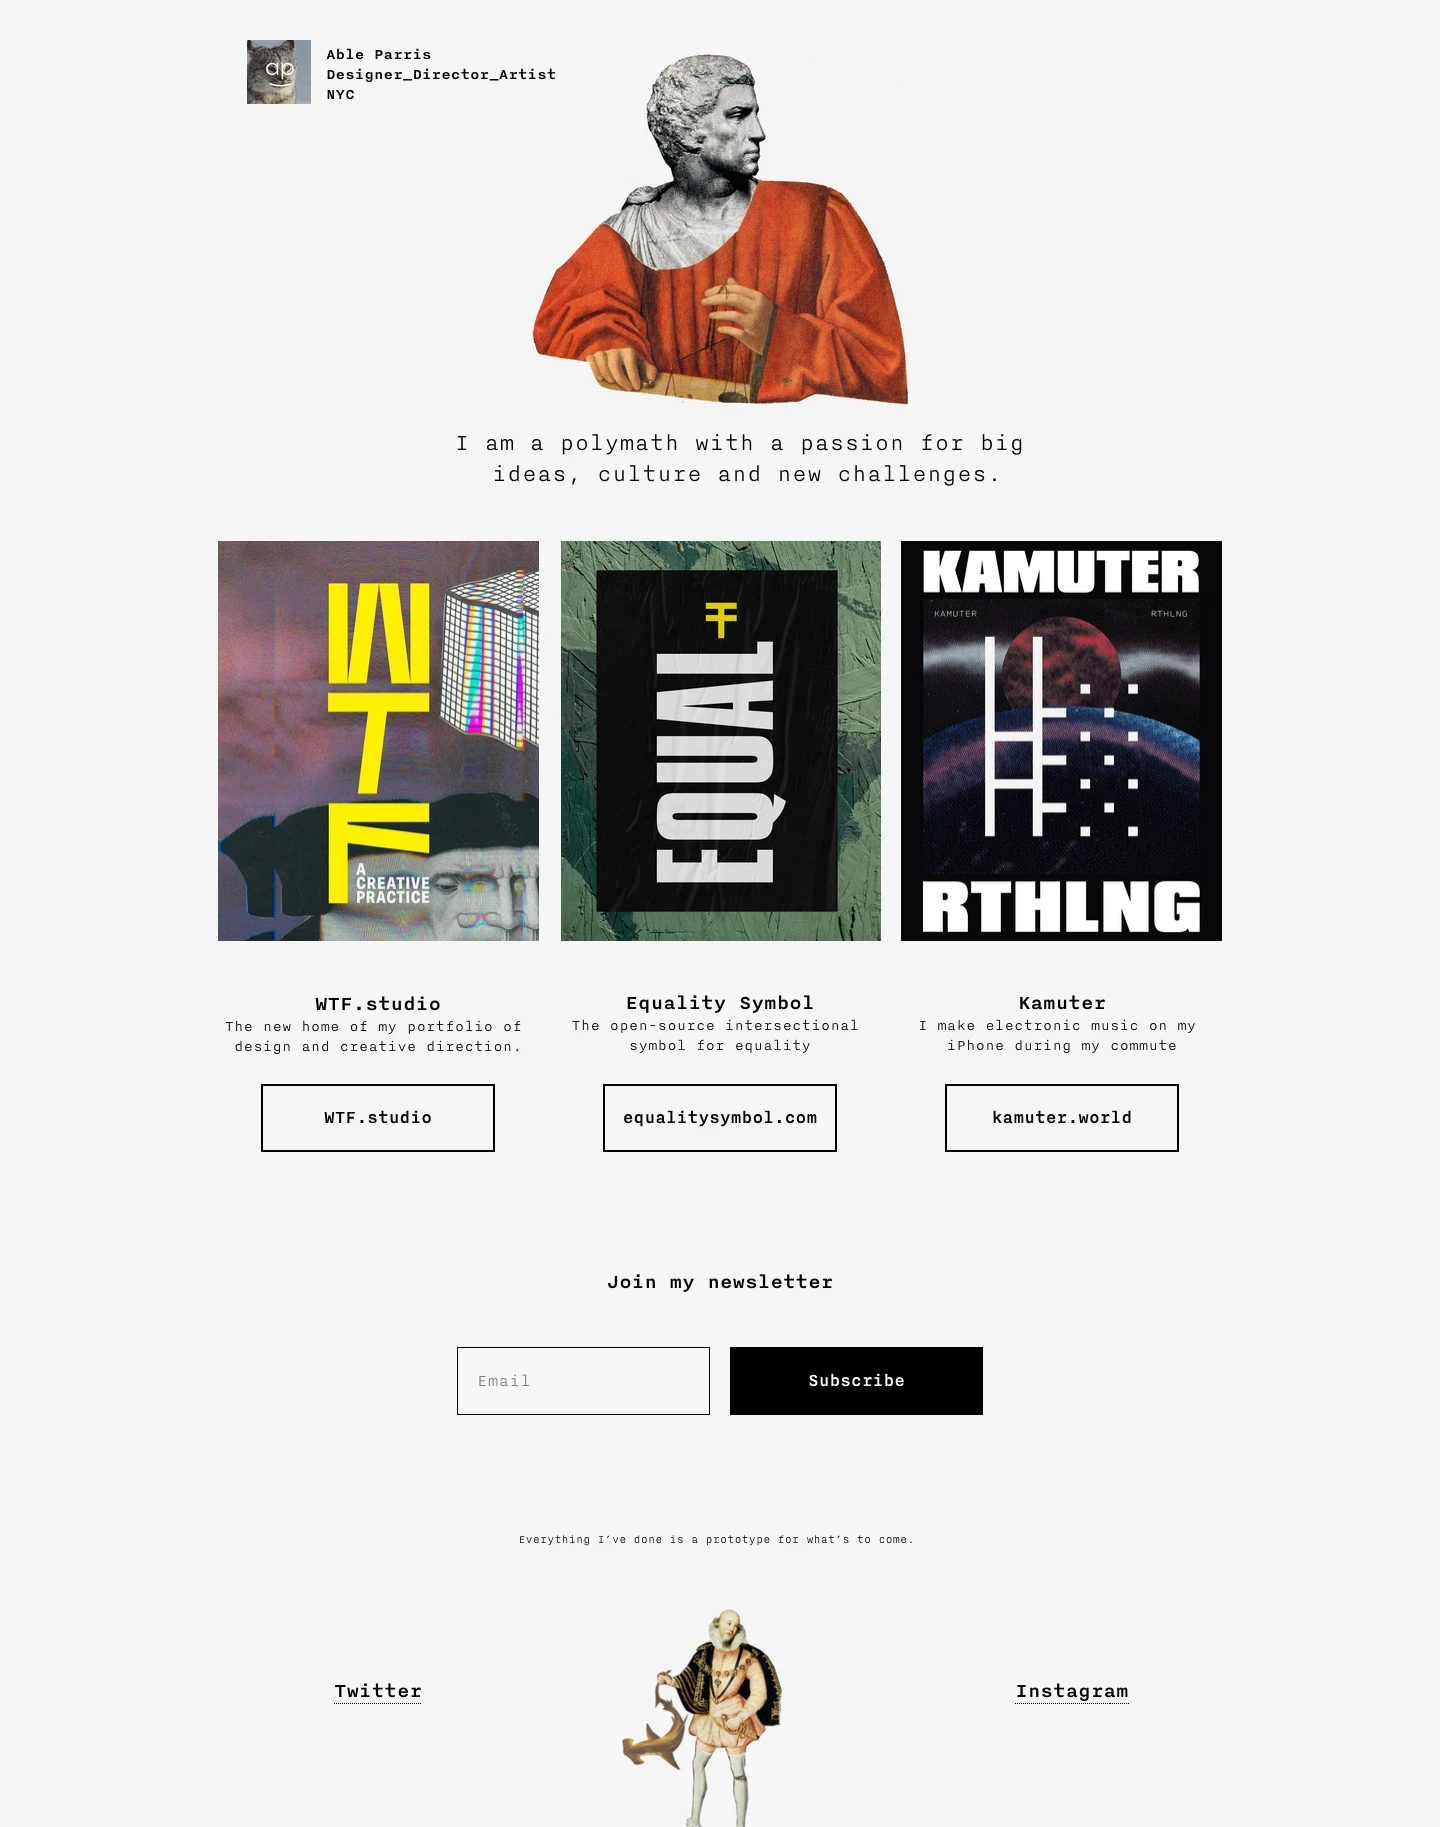 Able Parris Landing Page Example: I am a polymath with a passion for big ideas, culture and new challenges.